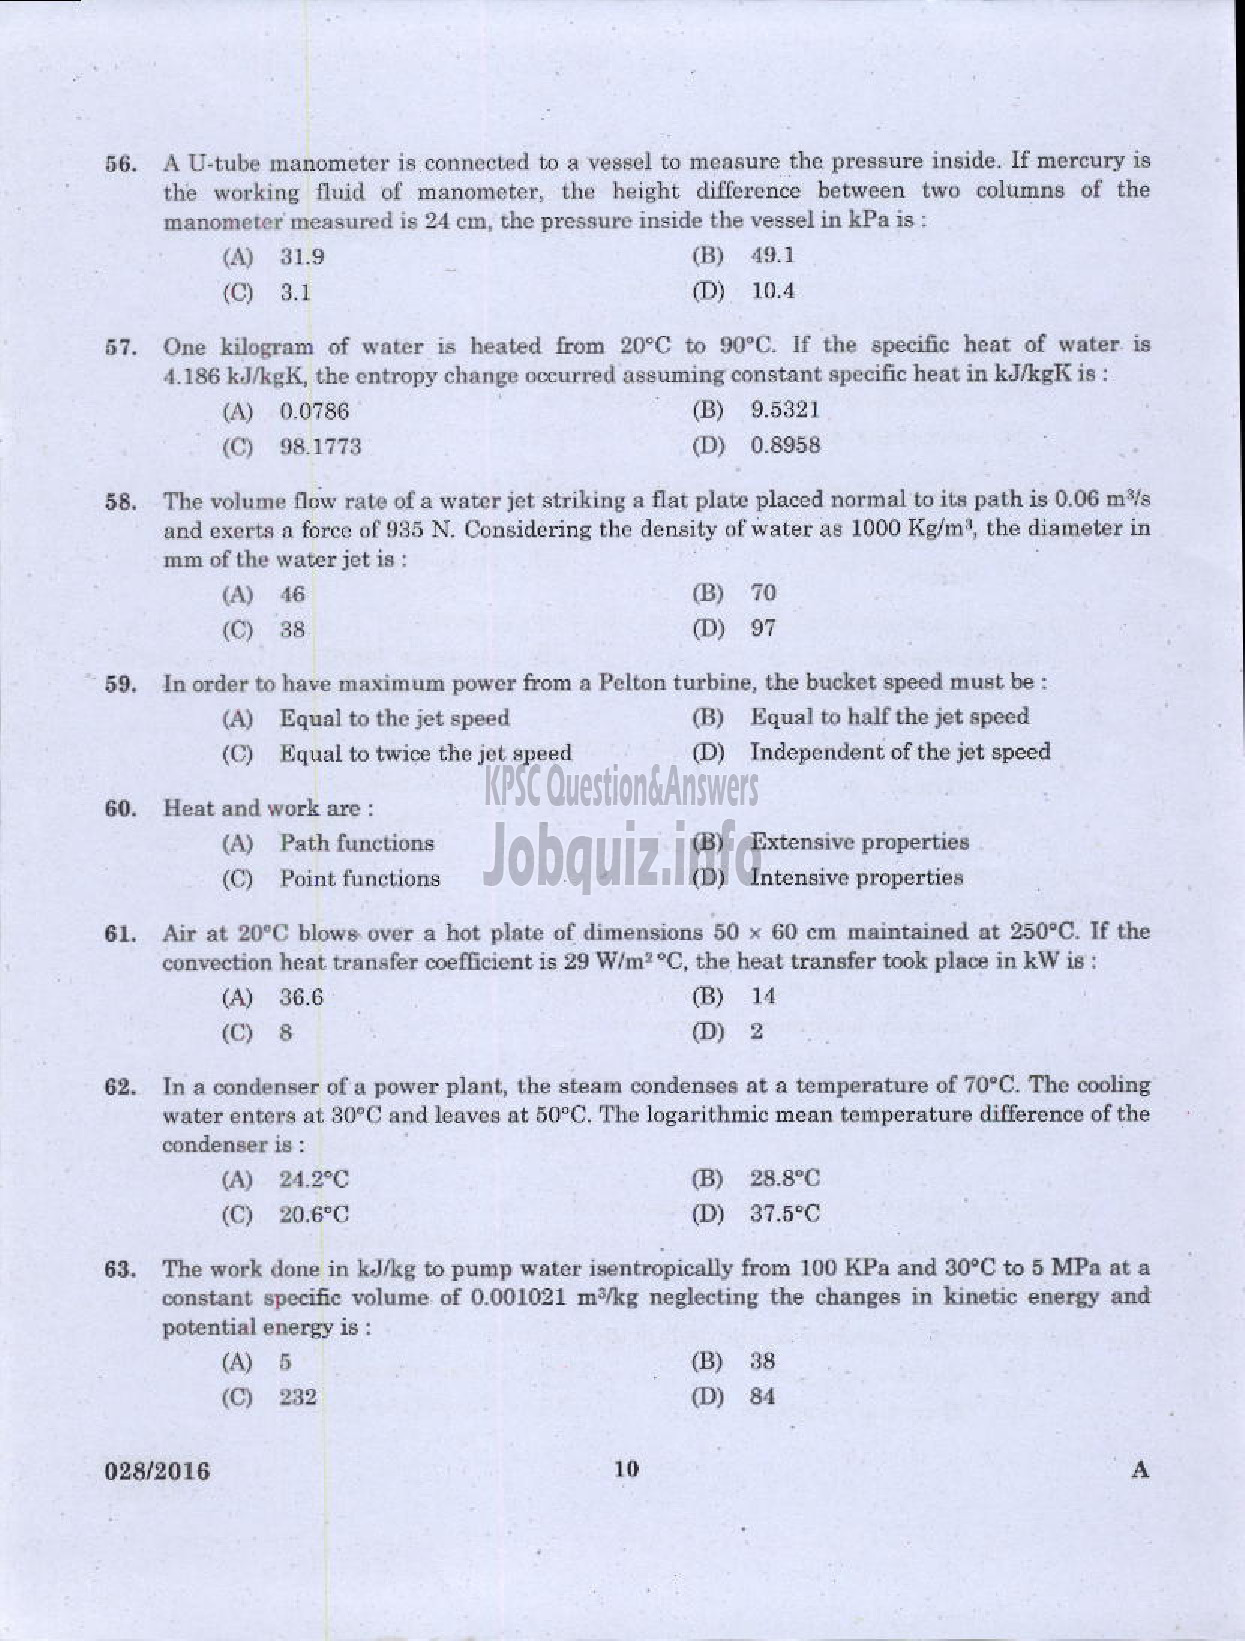 Kerala PSC Question Paper - ASSISTANT ENGINEER DIRECT/BY TRANSFER KERALA WATER AUTHORITY-8